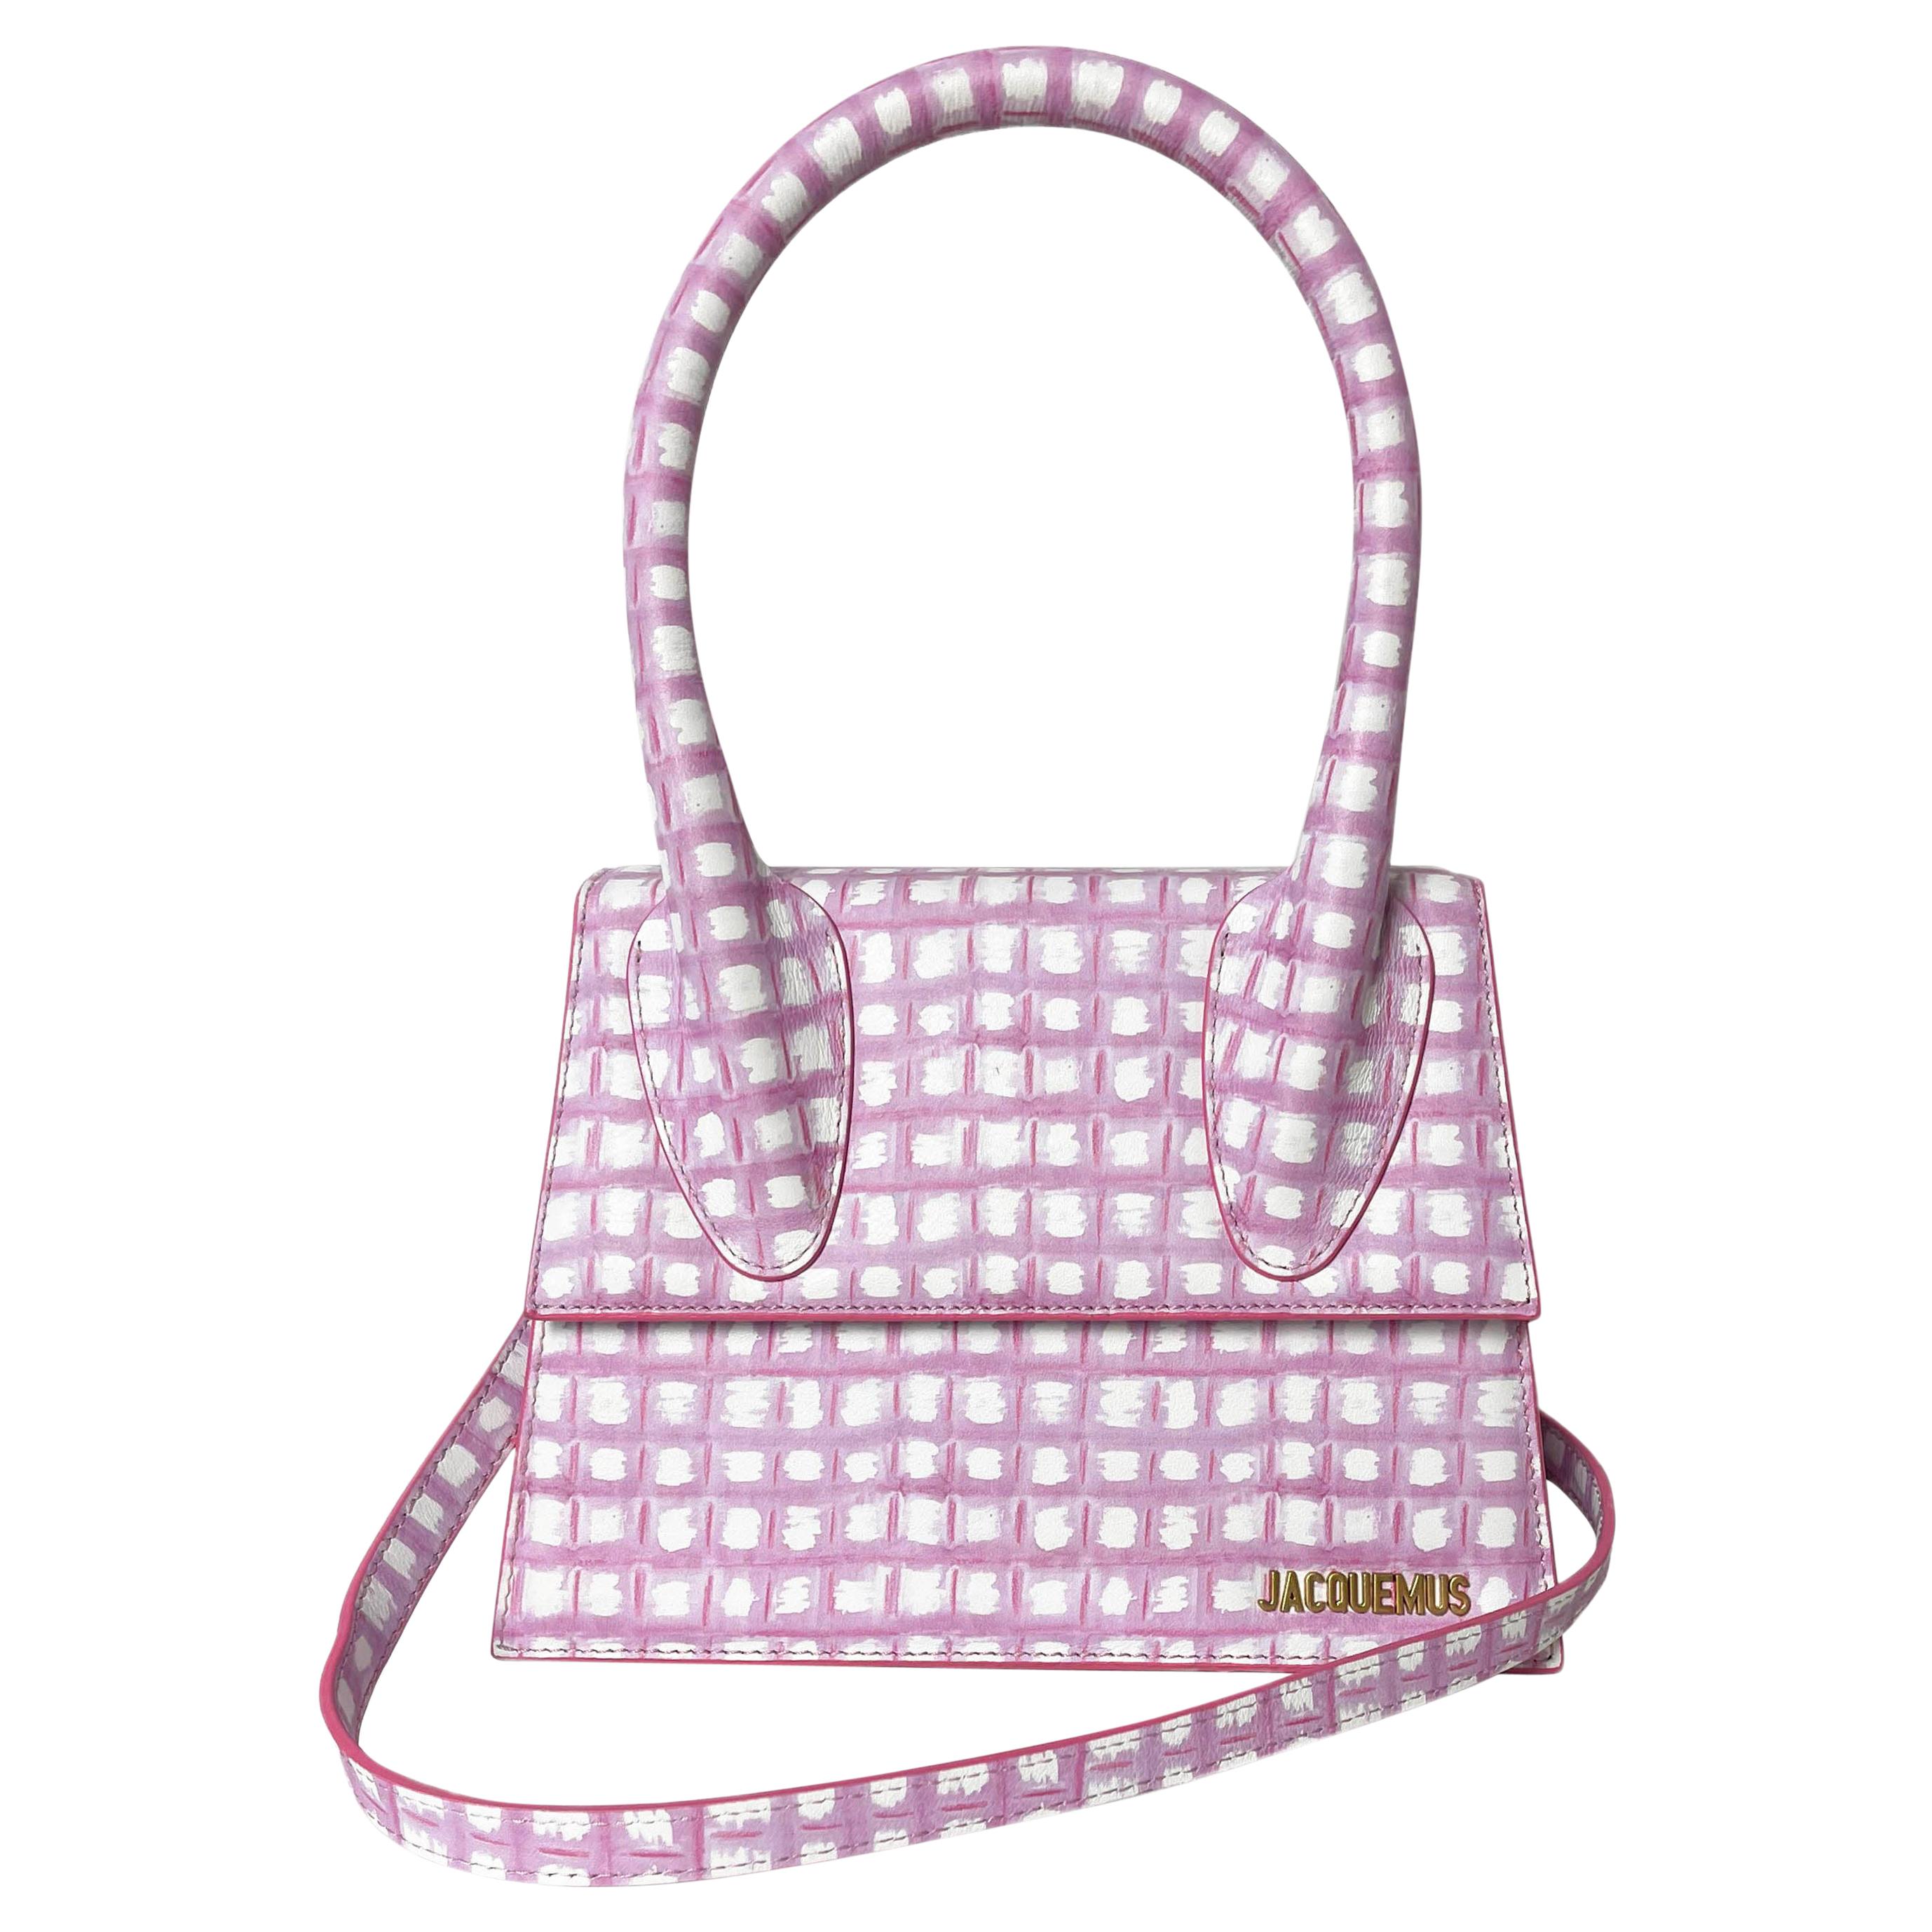 JACQUEMUS Pink Gingham Le Grand Chiquito Tote Bag w/ Optional Crossbody Strap